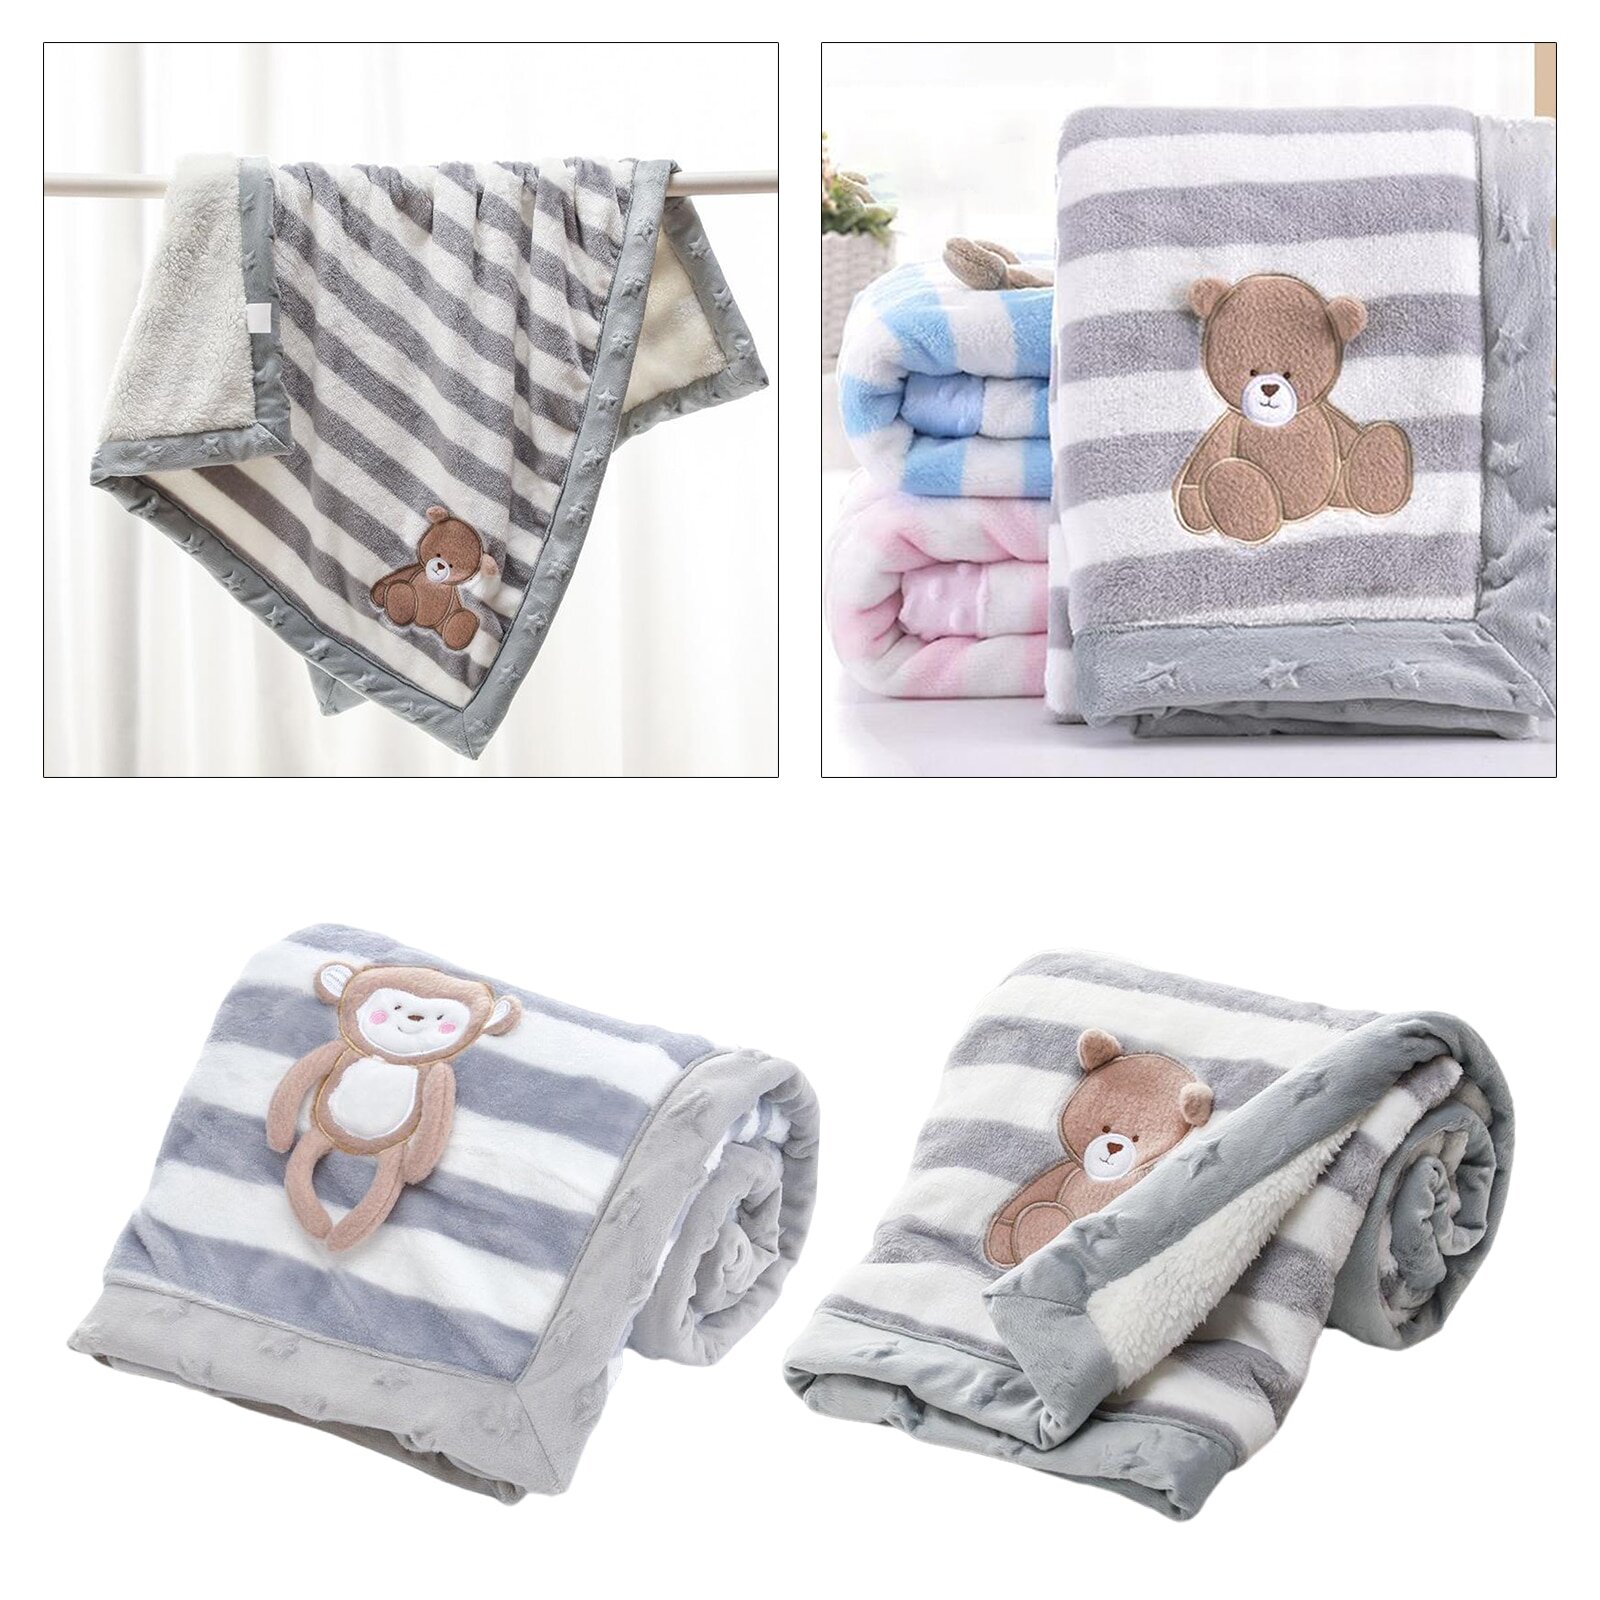 Flannel Newborn Blanket with Sherpa Back for Baby Girl or Boy, Soft Warm Cozy Toddler, Infant or Blanket for Crib, Stroller